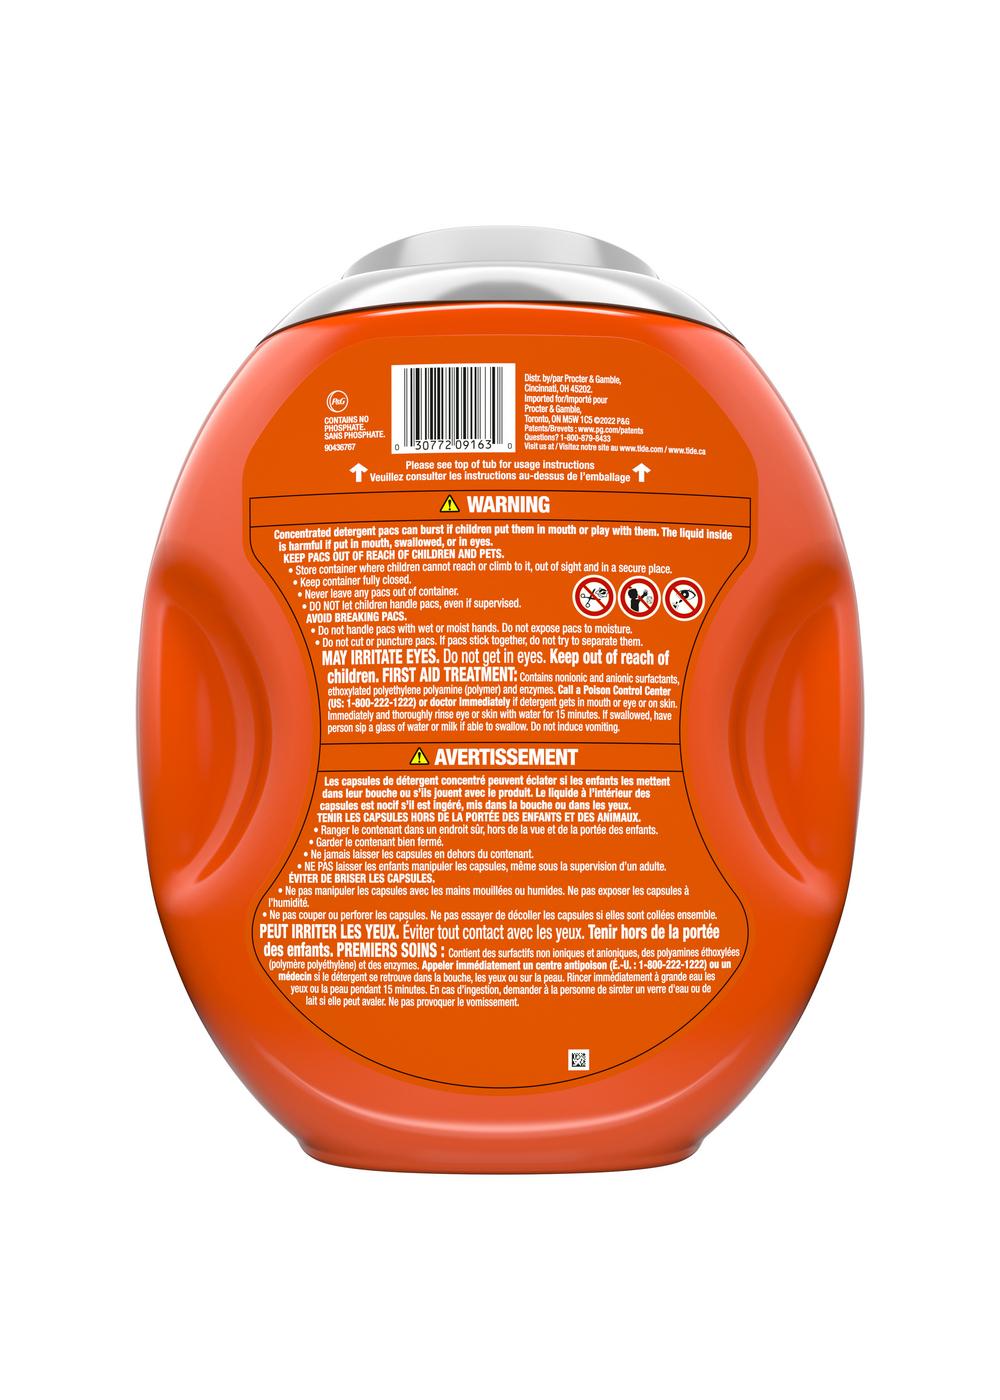 Tide Power PODS Hygienic Clean Heavy Duty Original HE Laundry Detergent; image 4 of 5